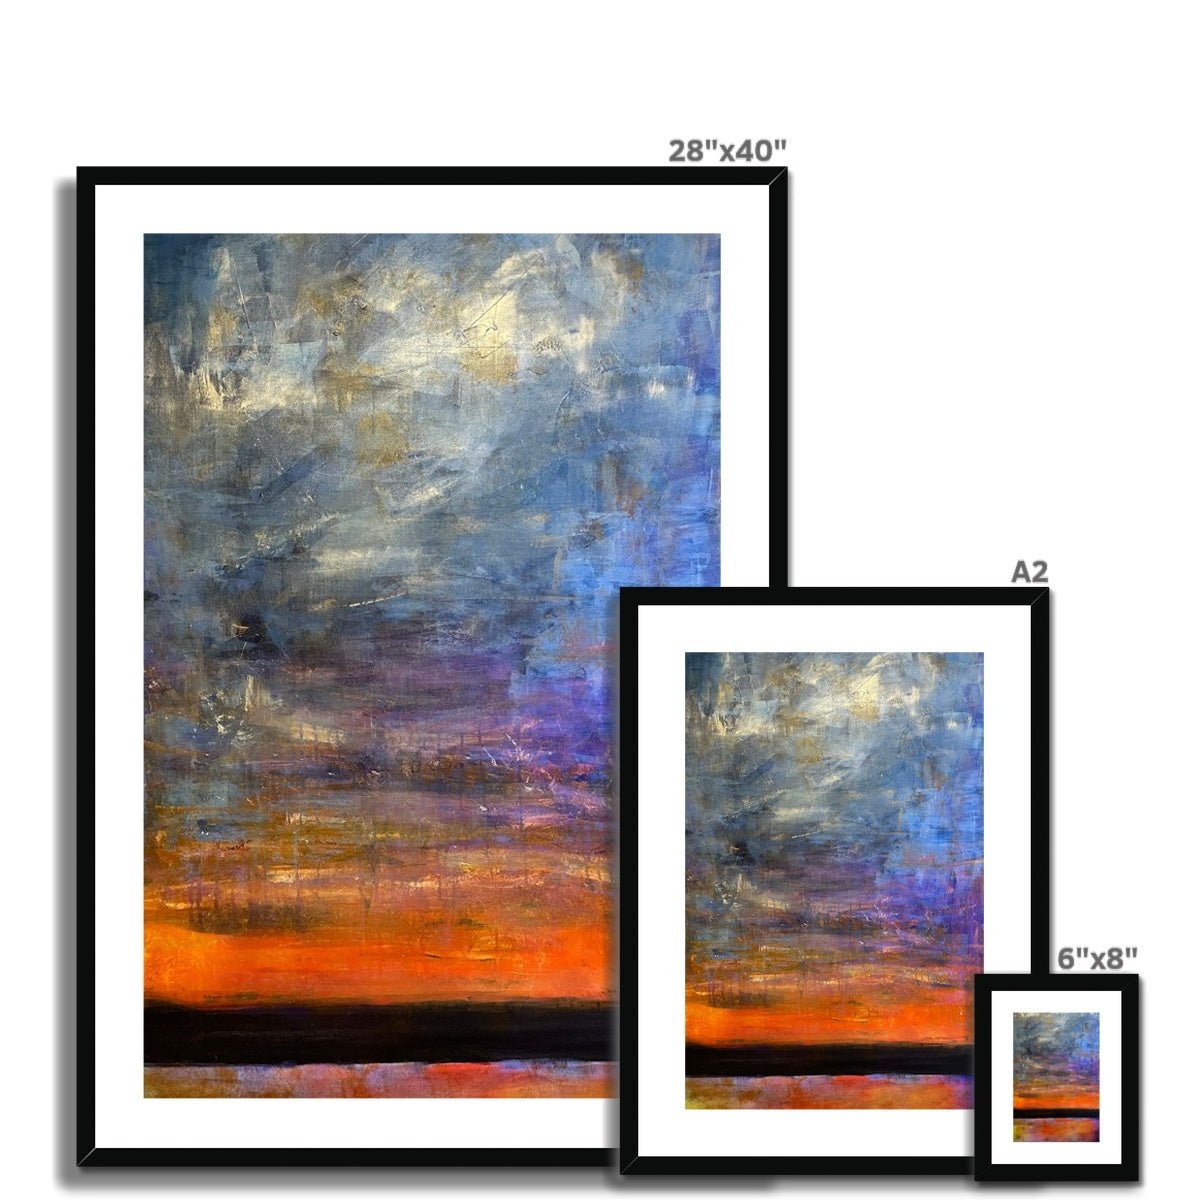 Horizon Dreams Abstract Painting | Framed & Mounted Prints From Scotland-Framed & Mounted Prints-Abstract & Impressionistic Art Gallery-Paintings, Prints, Homeware, Art Gifts From Scotland By Scottish Artist Kevin Hunter